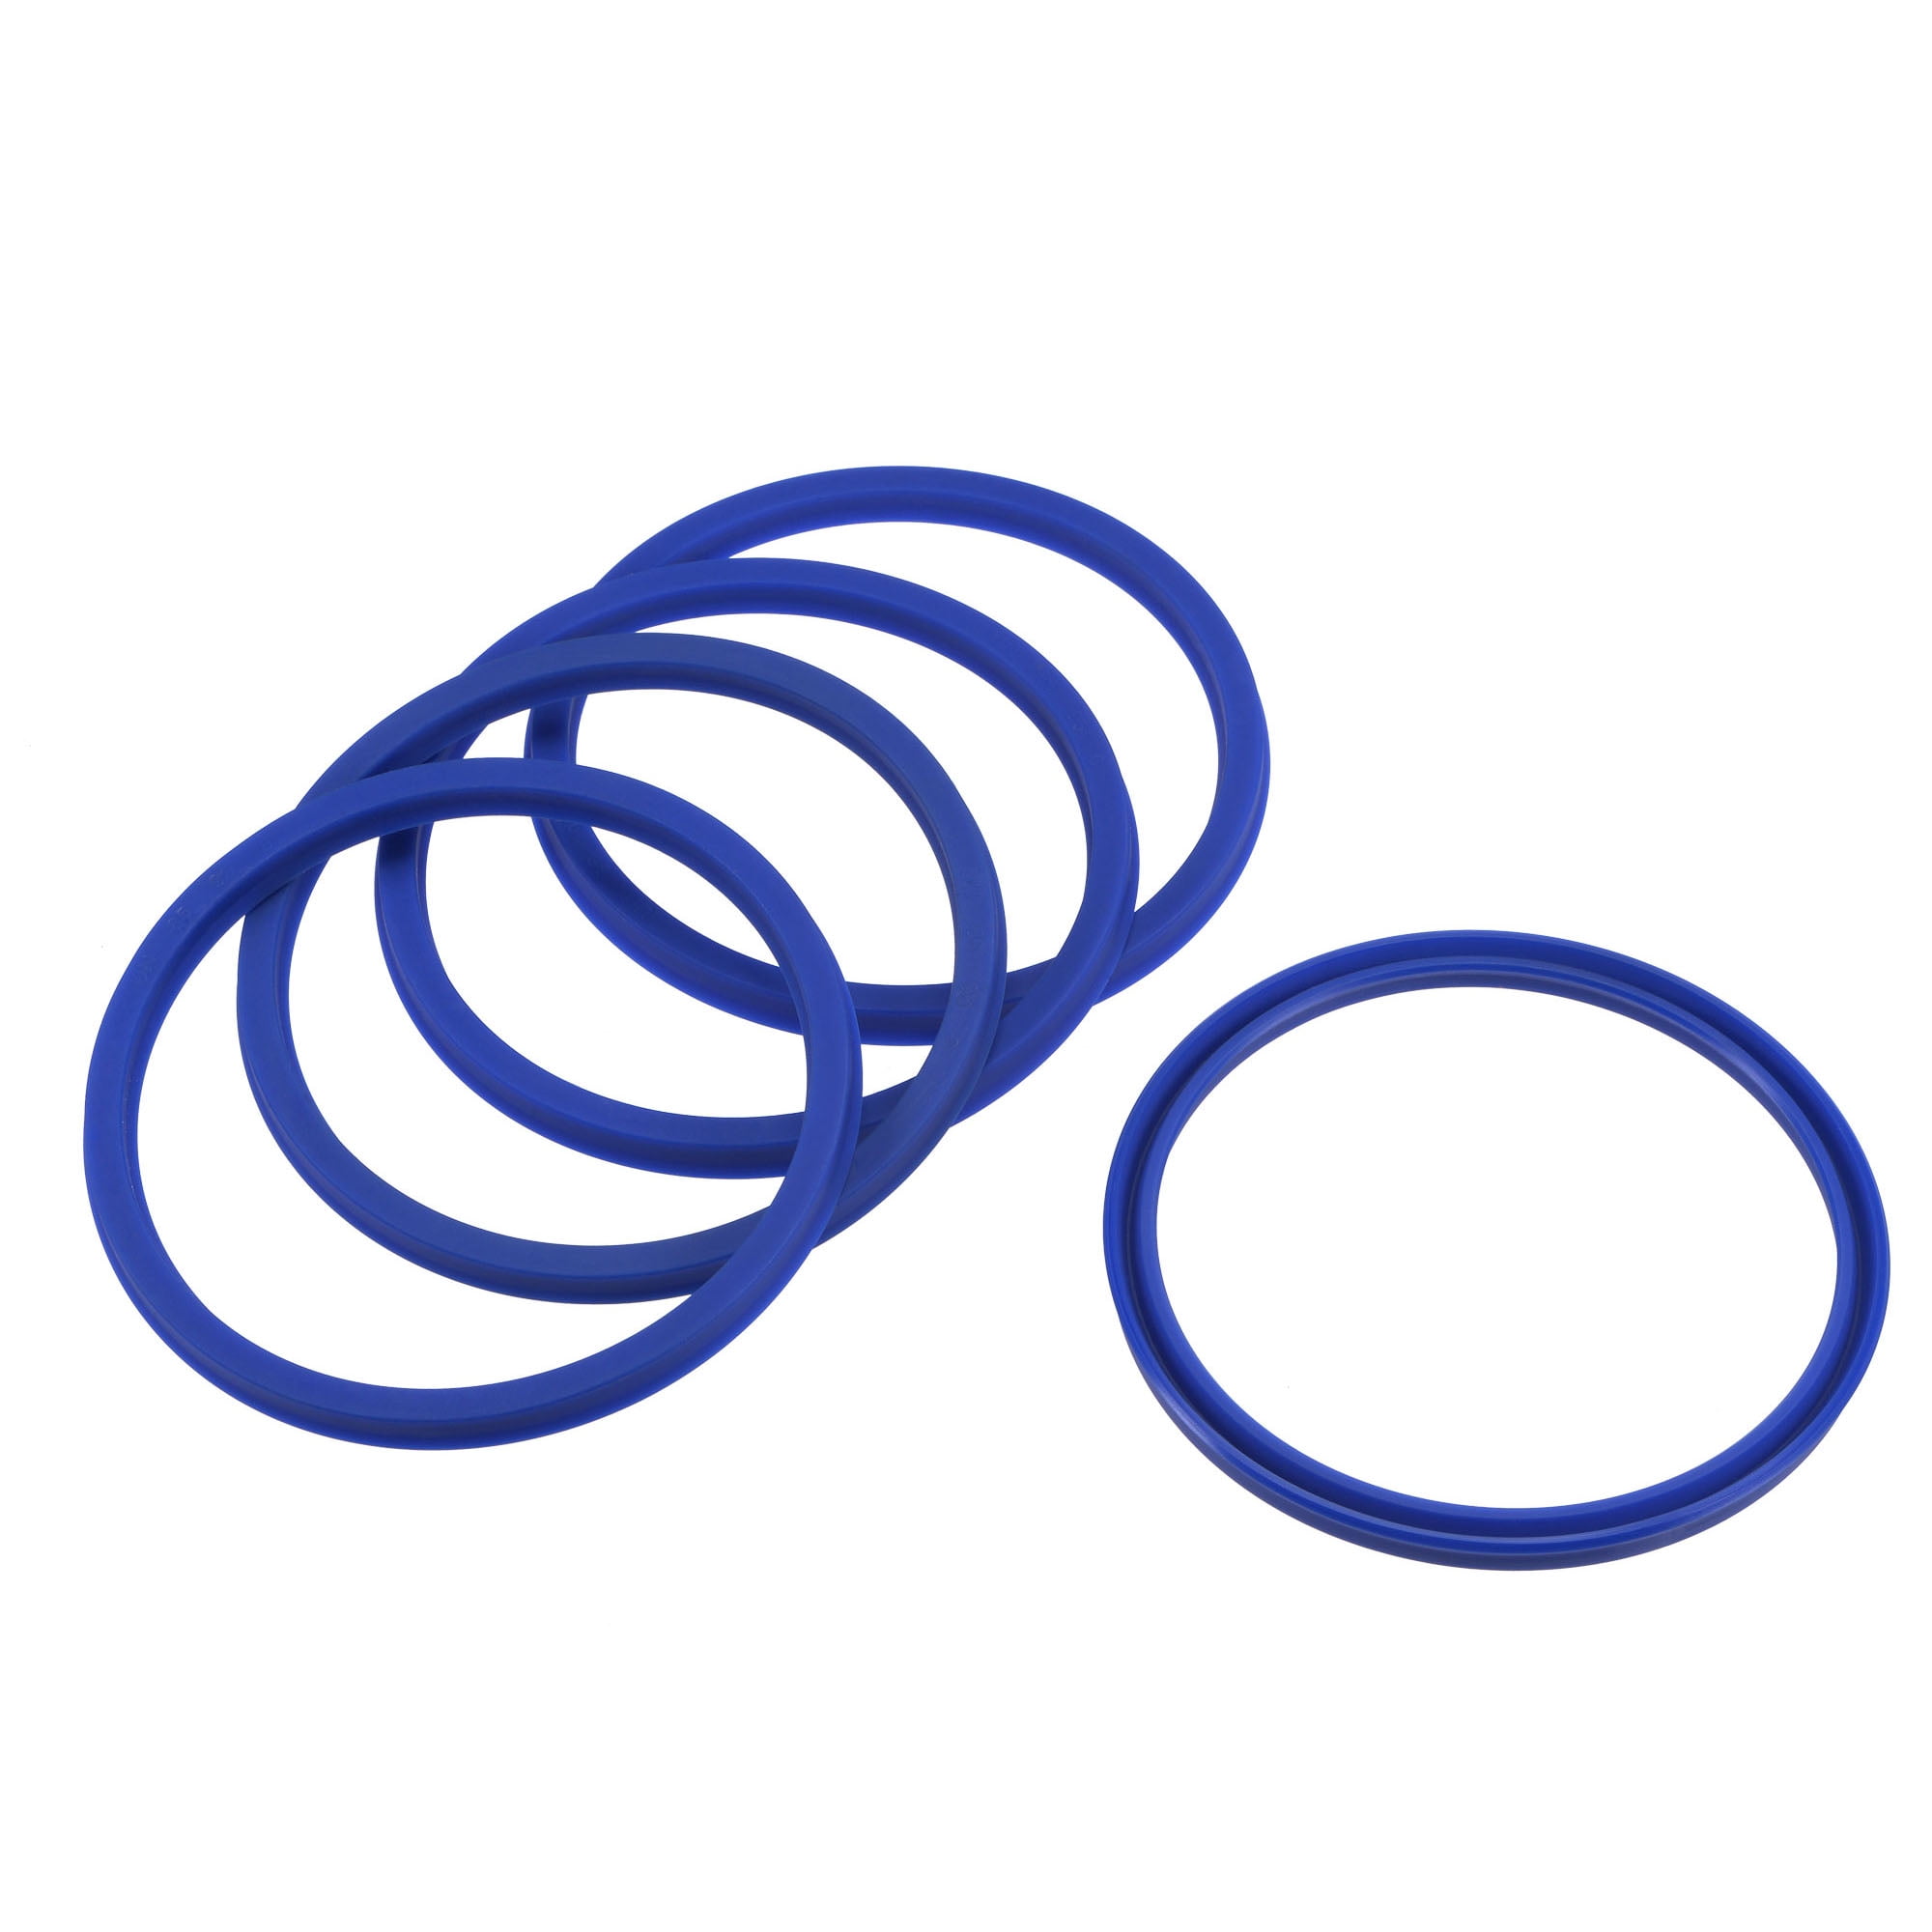 Uxcell 40mm x 48mm x 6mm UN Type Radial Shaft Oil Seal PU Blue 5 Count 